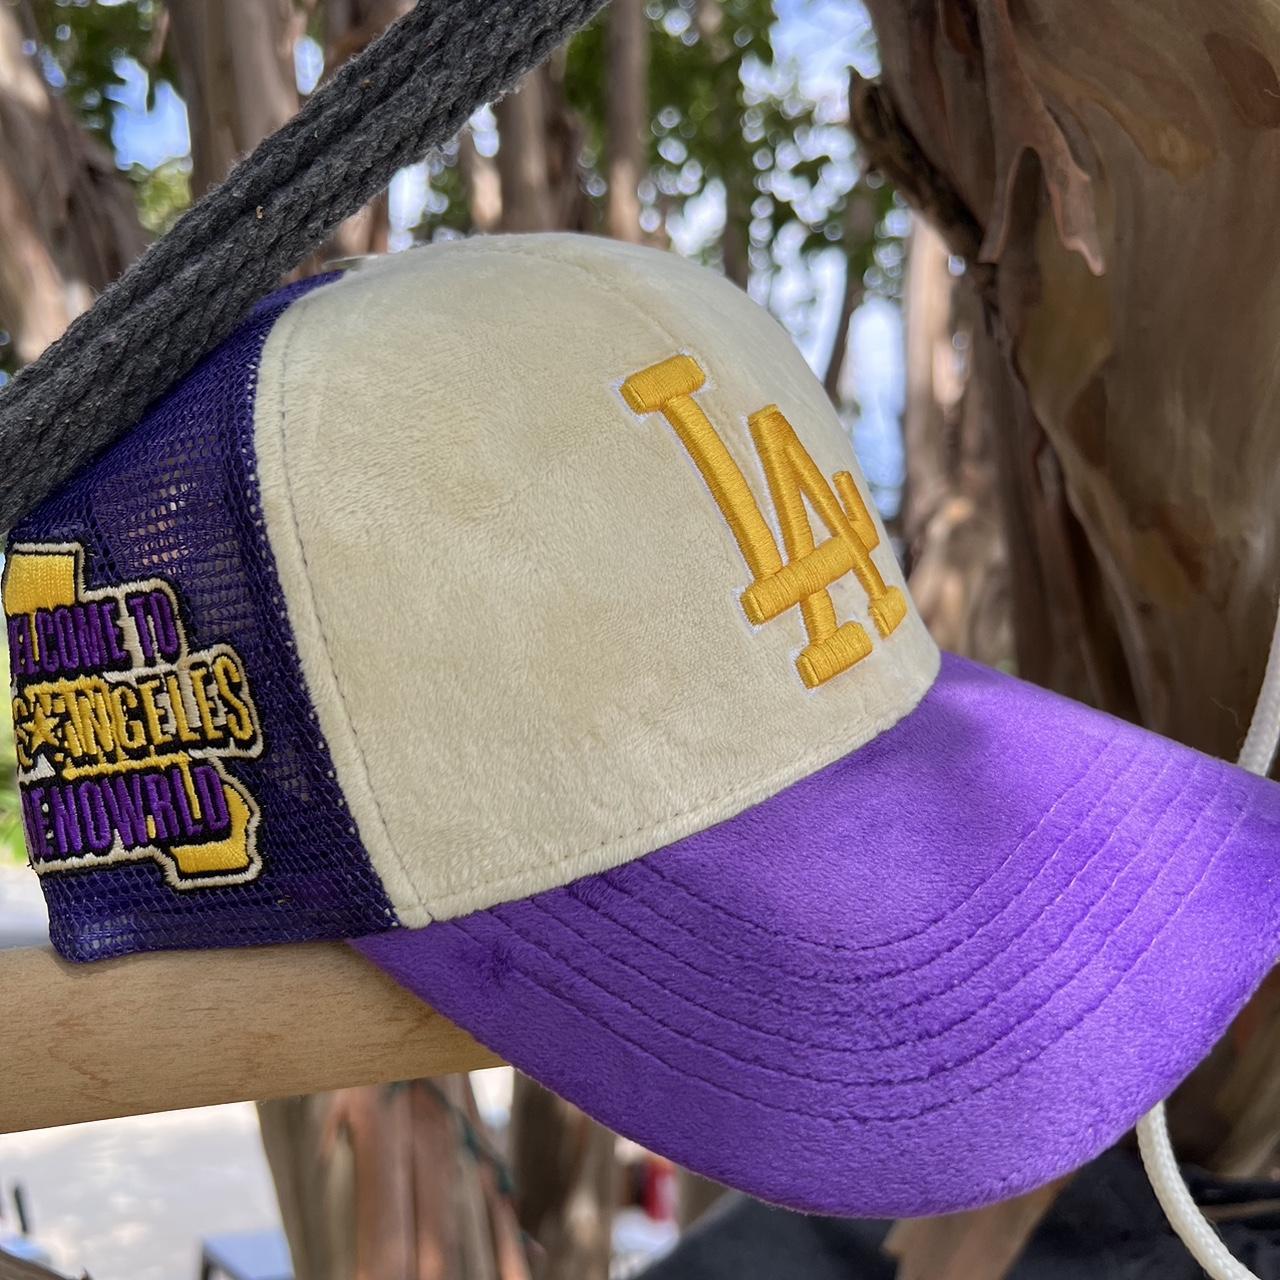 Adidas Lakers Hats for Men